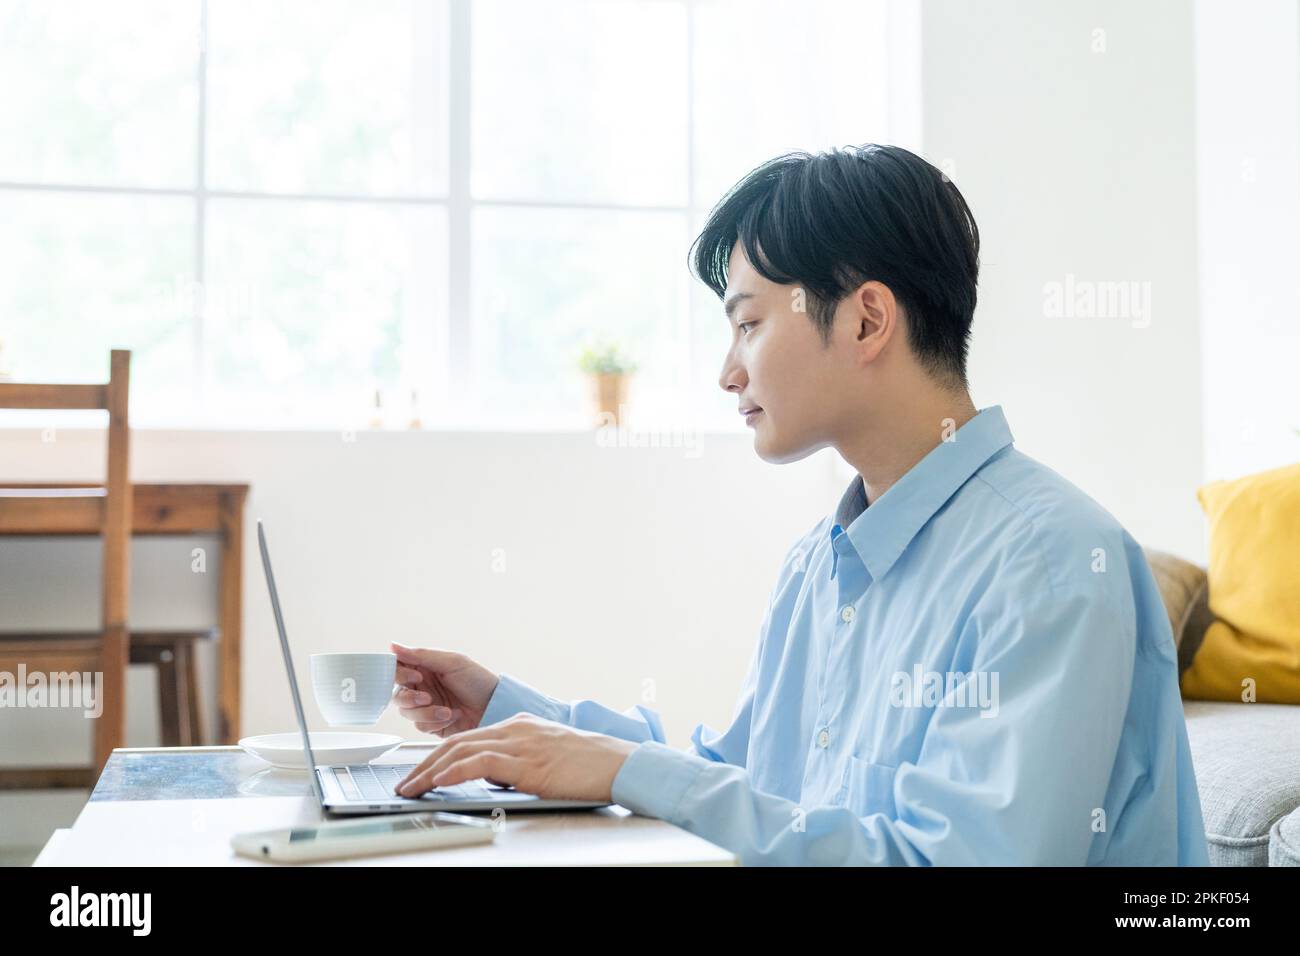 Man working remotely Stock Photo